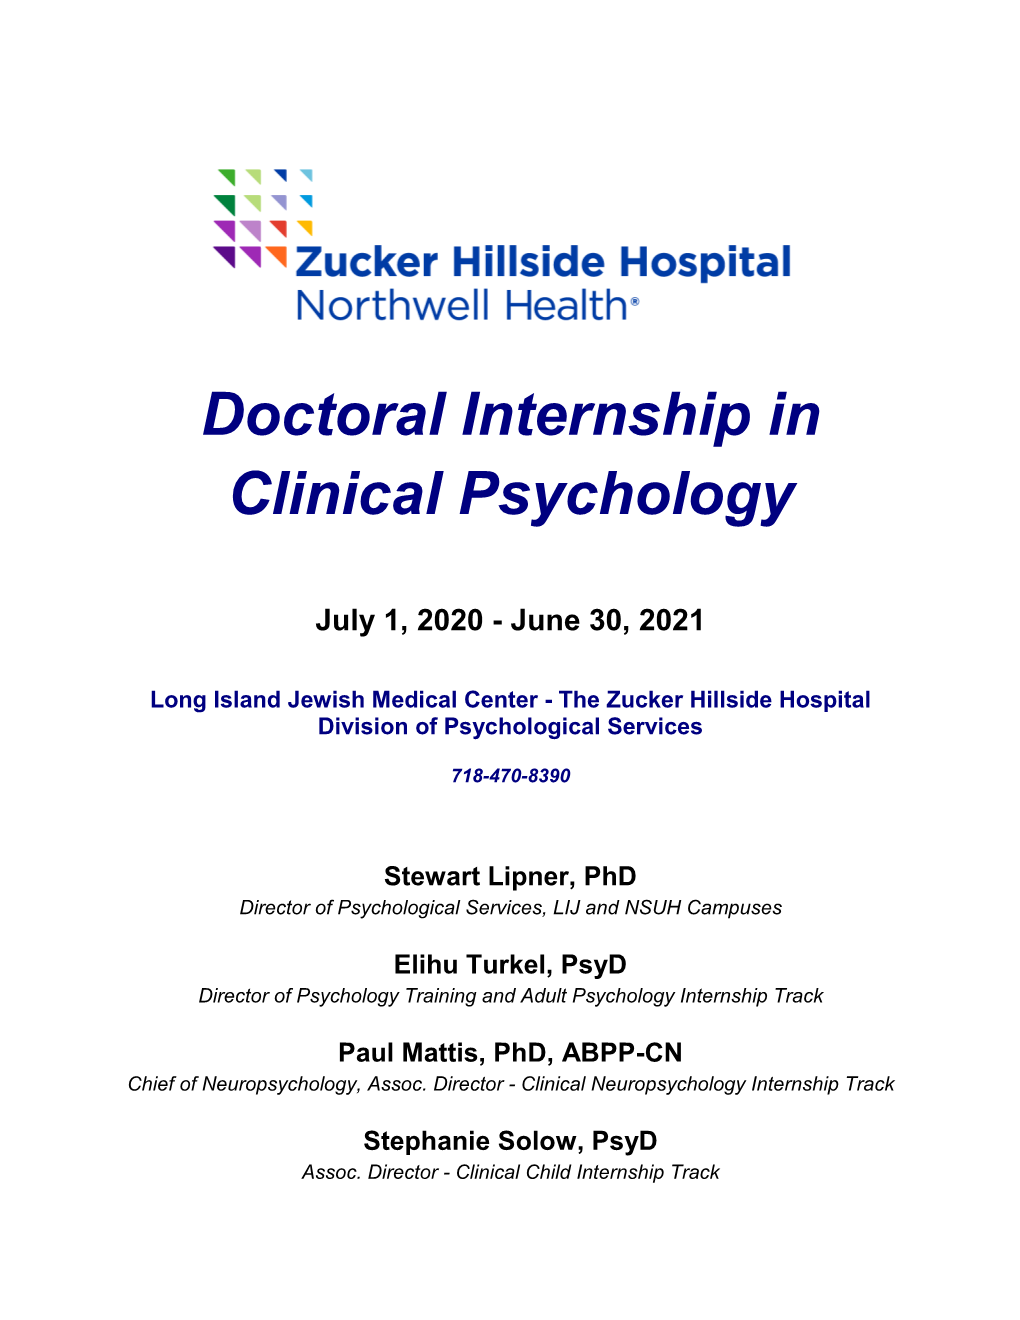 Doctoral Internship in Clinical Psychology